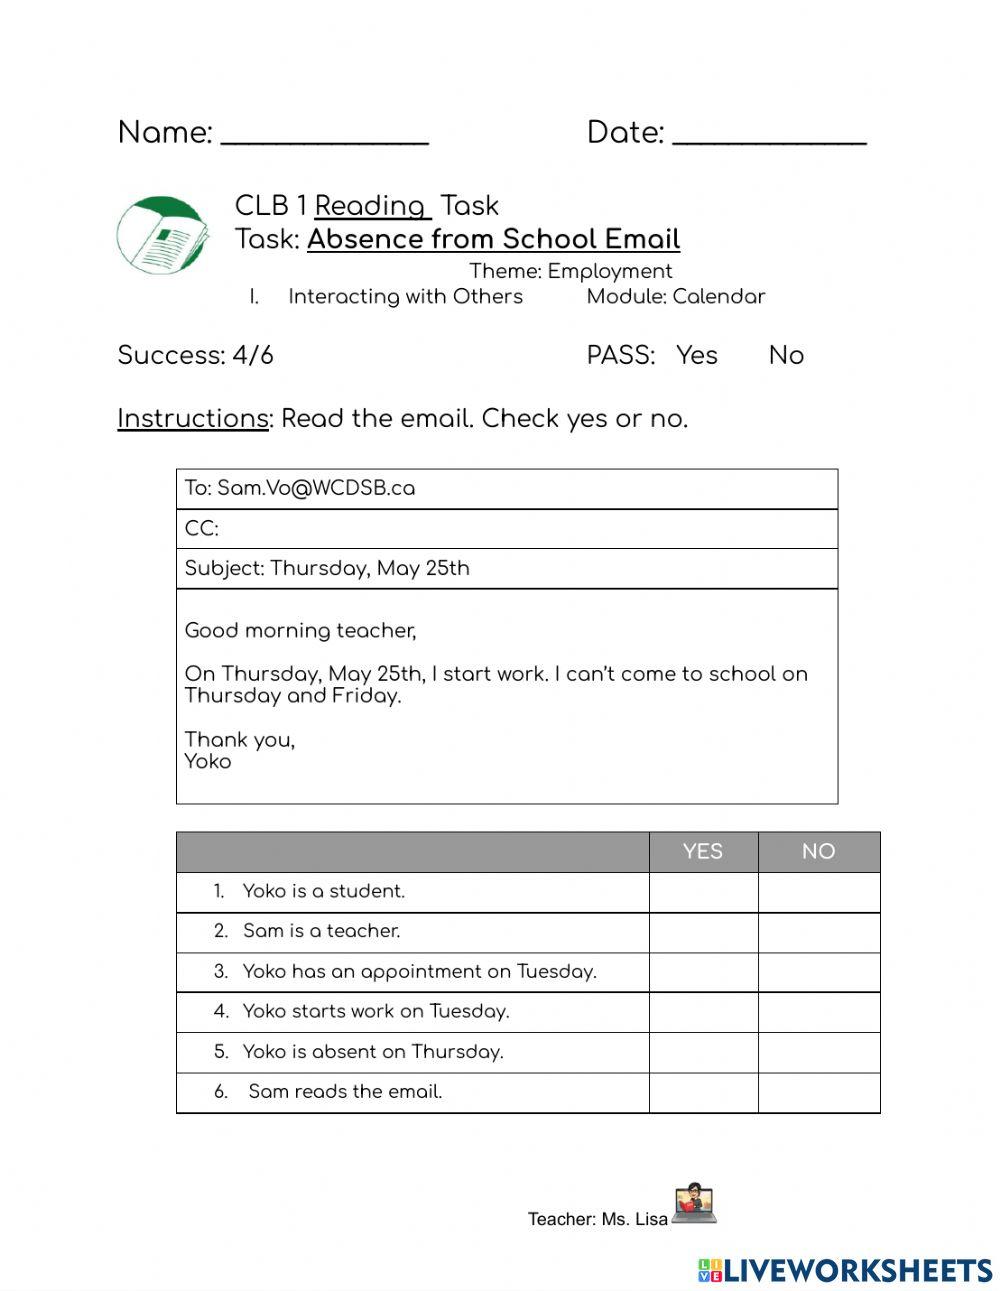 CLB1: Writing Task: Email to Teacher 